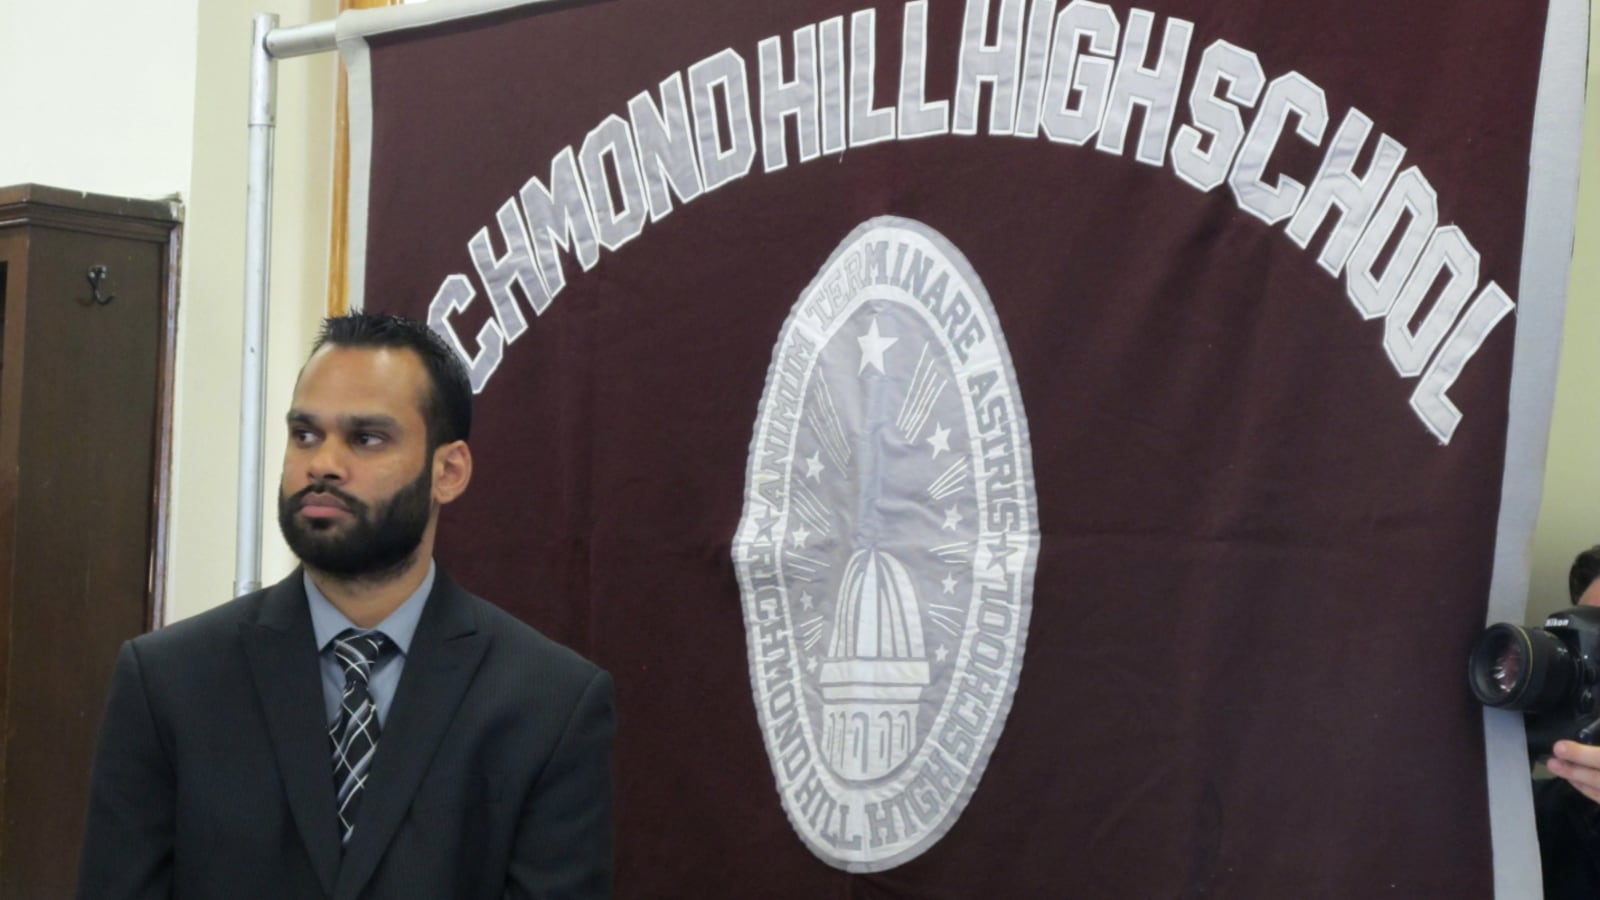 Richmond Hill High School Principal Neil Ganesh was the subject of an angry letter from "concerned staff members" last week.